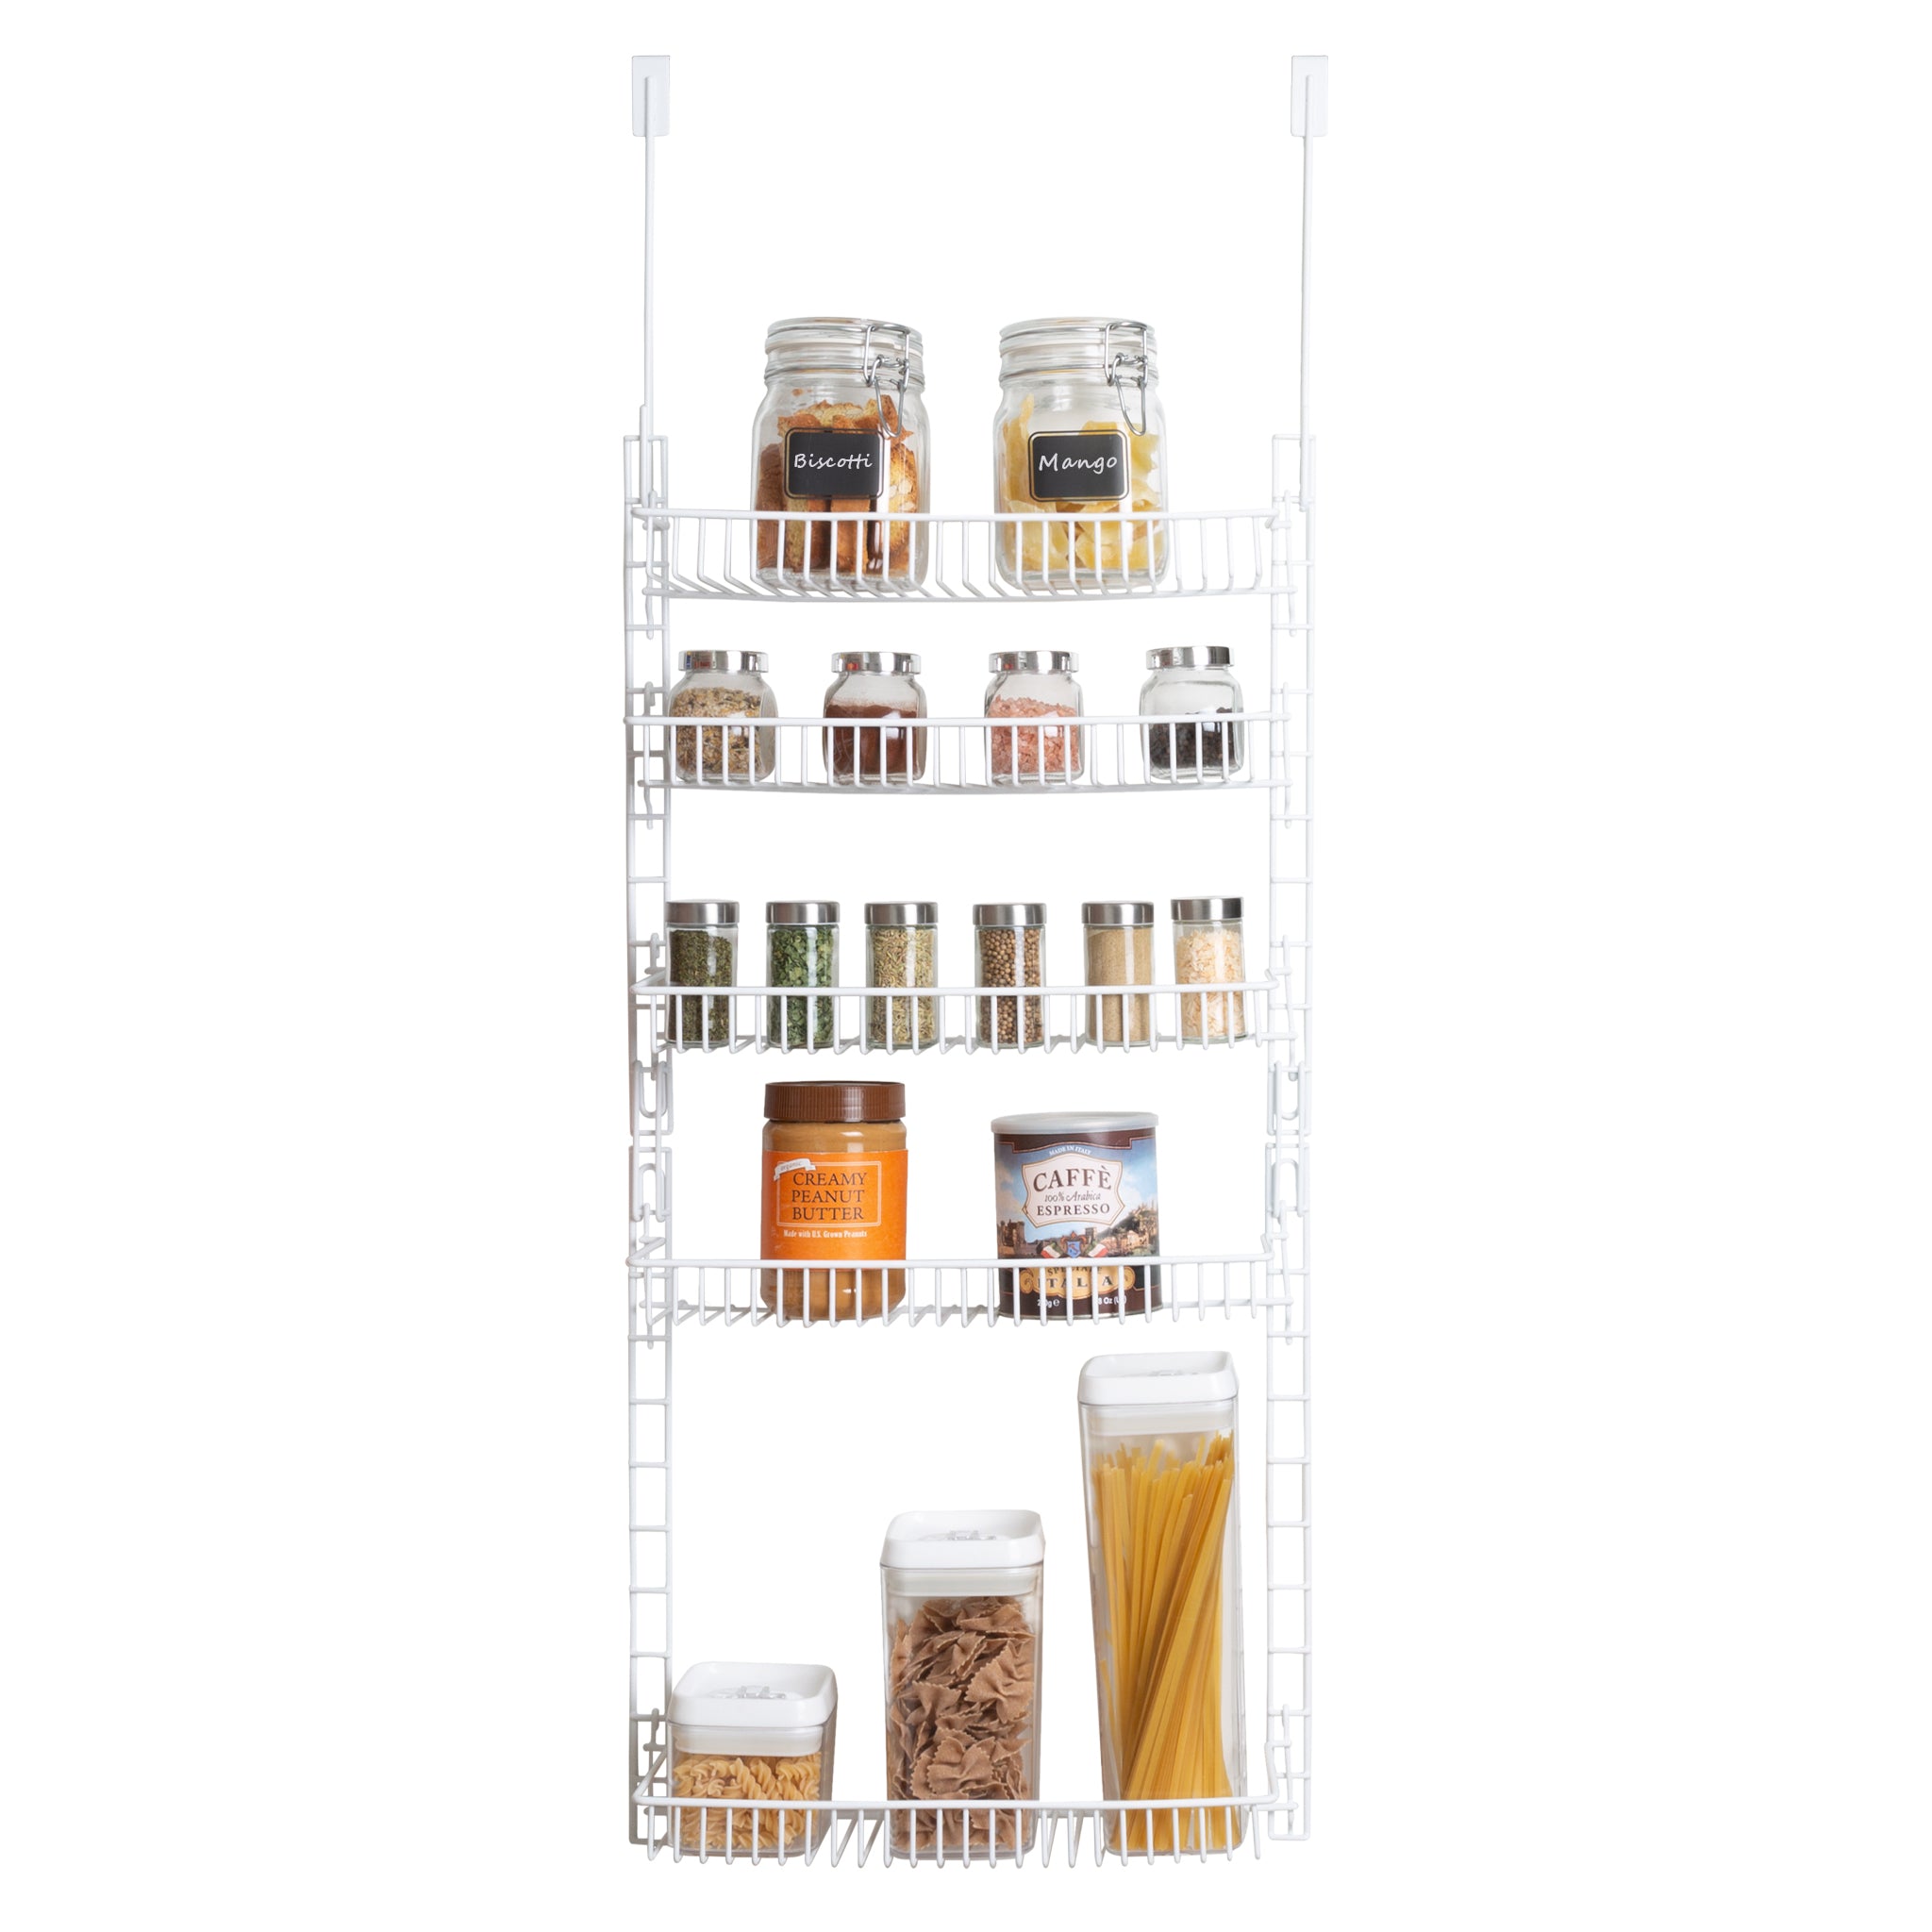 Over The Door Pantry Organization and Storage, Pantry Door Organizer, Spice Rack Organizer for Cabinet, Hanging Spice Rack, K Cup Holder, Shoe Rack, H